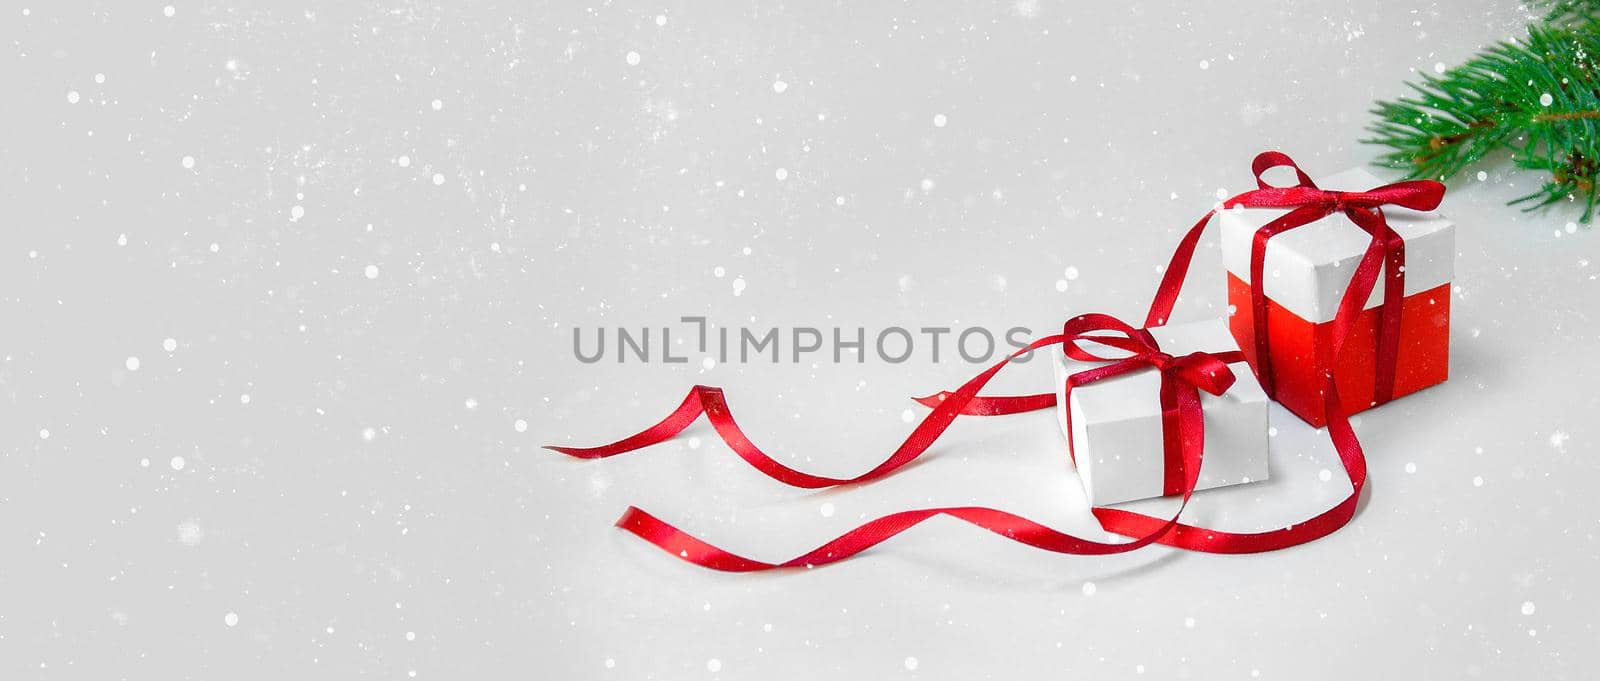 Christmas Gift's in White Box with Red Ribbon on Light Background. New Year Holiday Composition Banner. Copy Space For Your Text